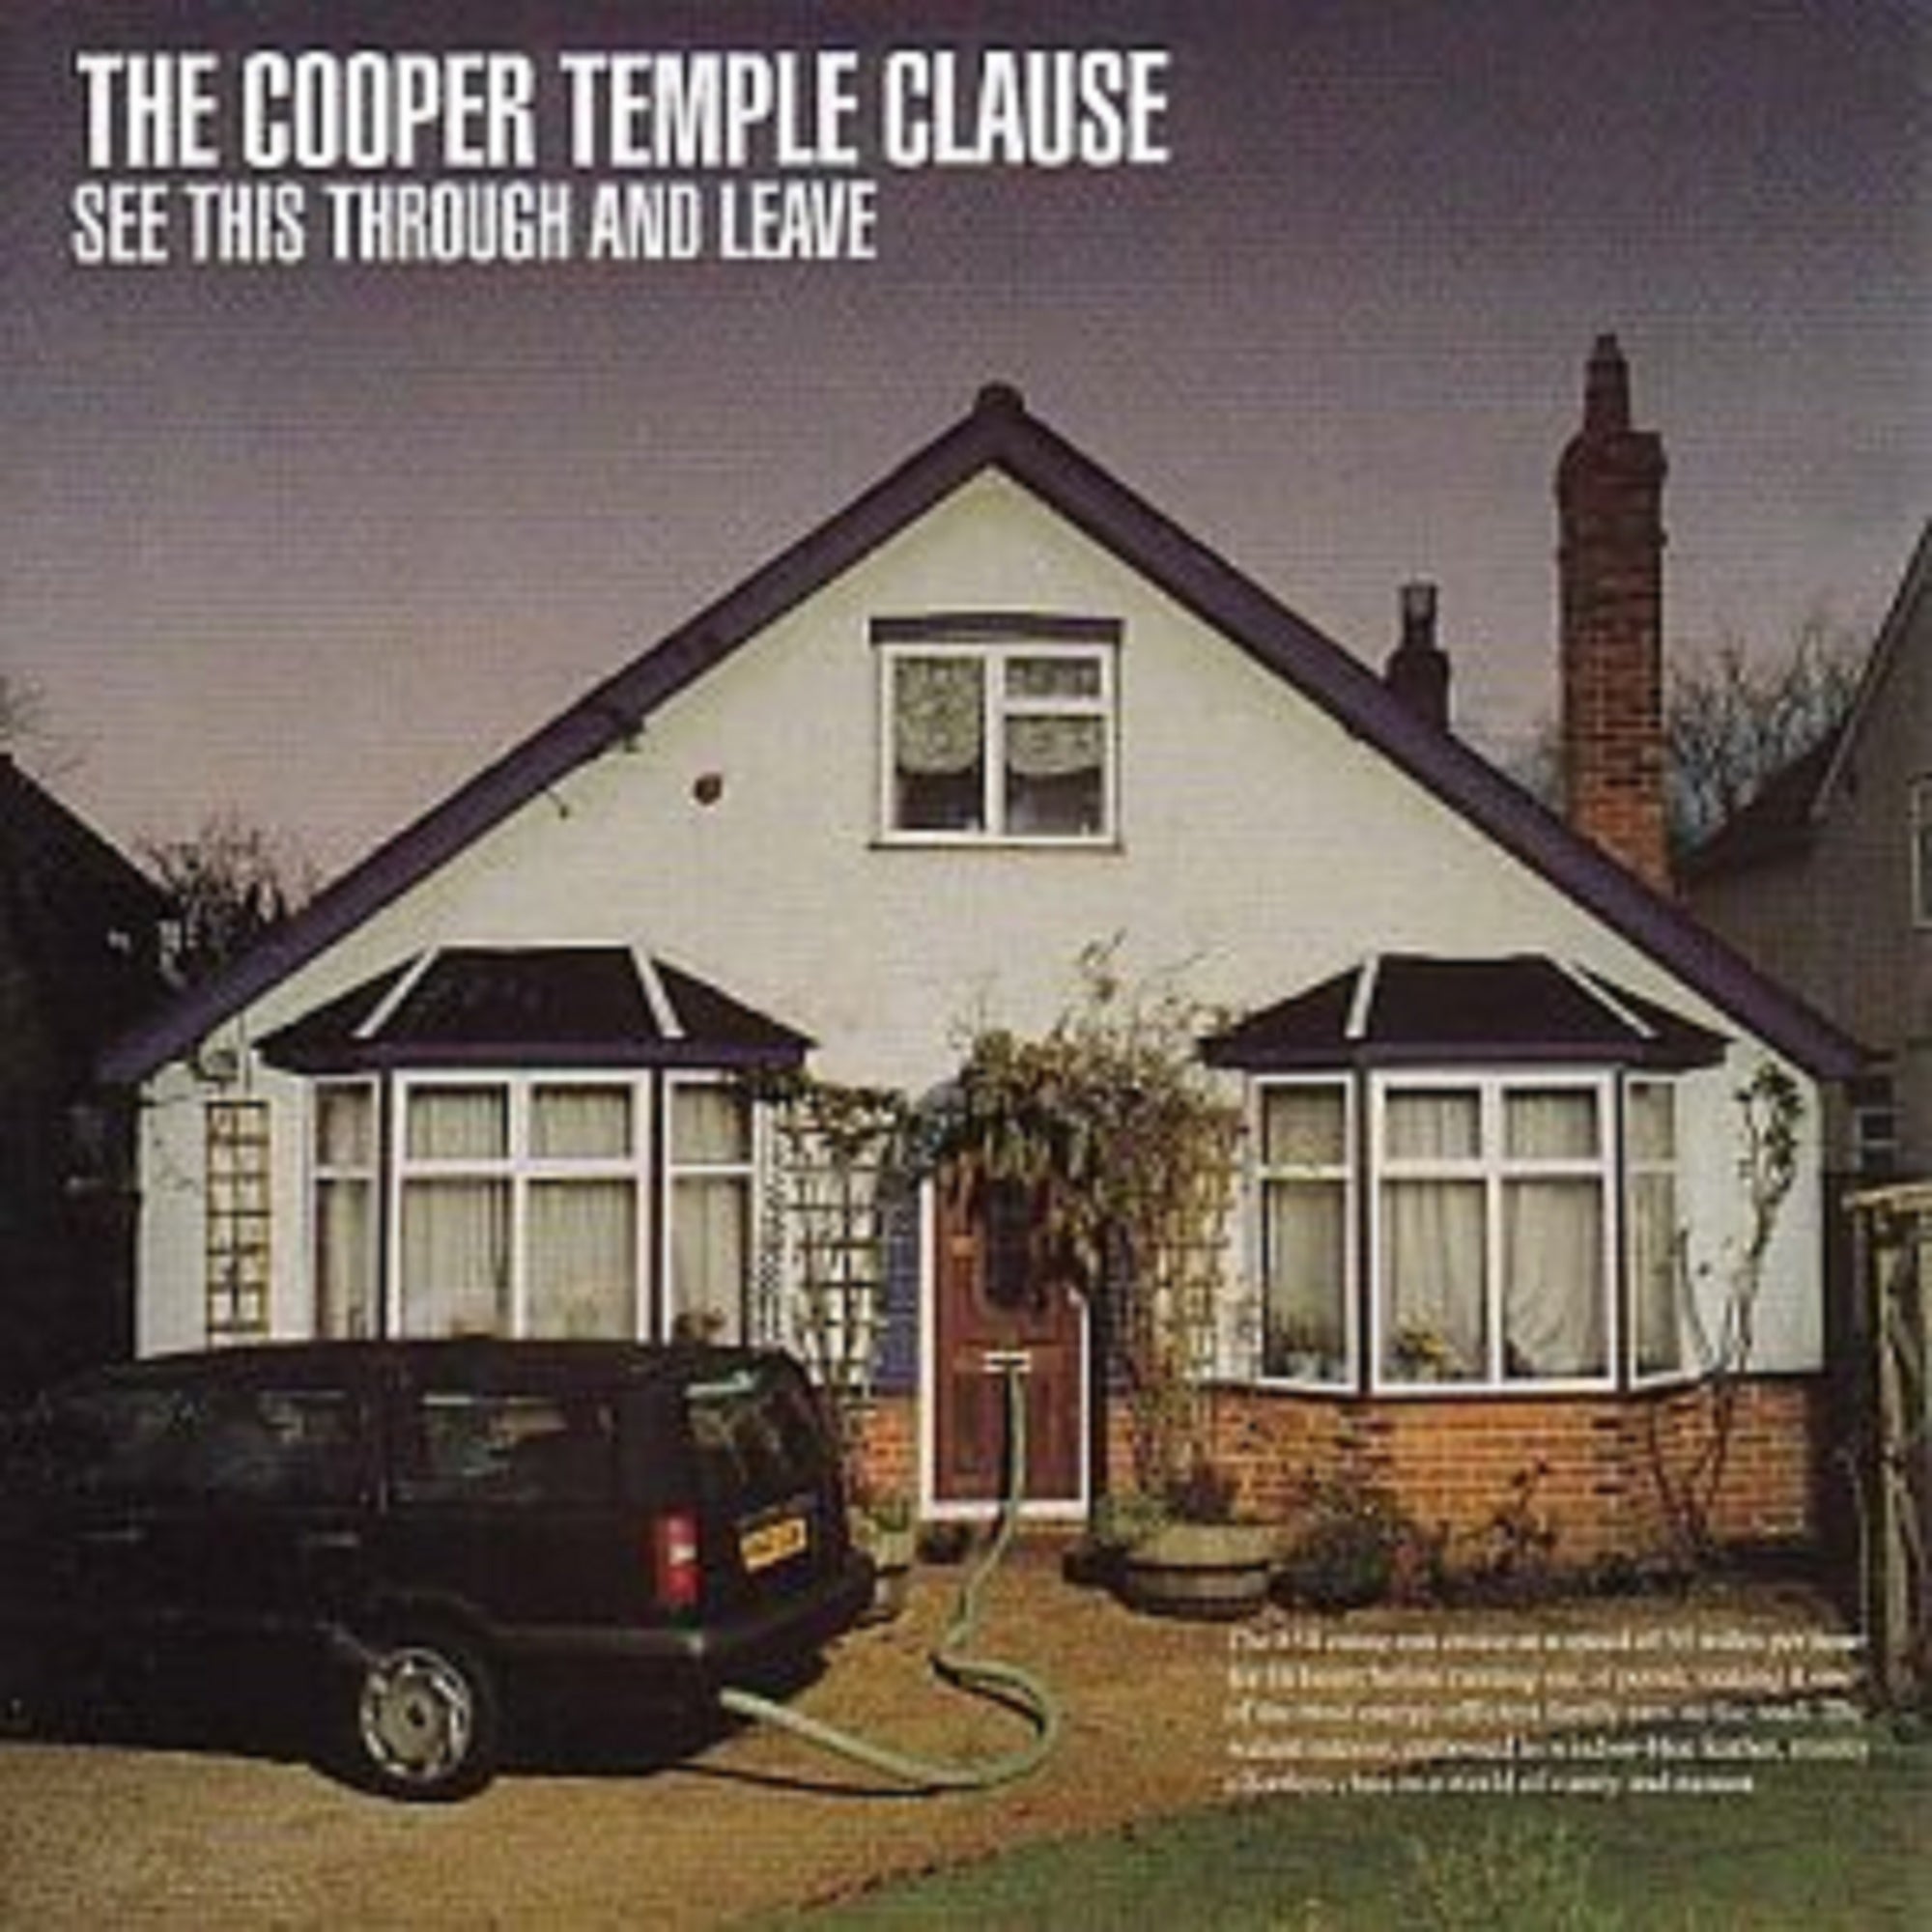 The Cooper Temple Clause - See This Through and Leave - BROKEN 8 RECORDS